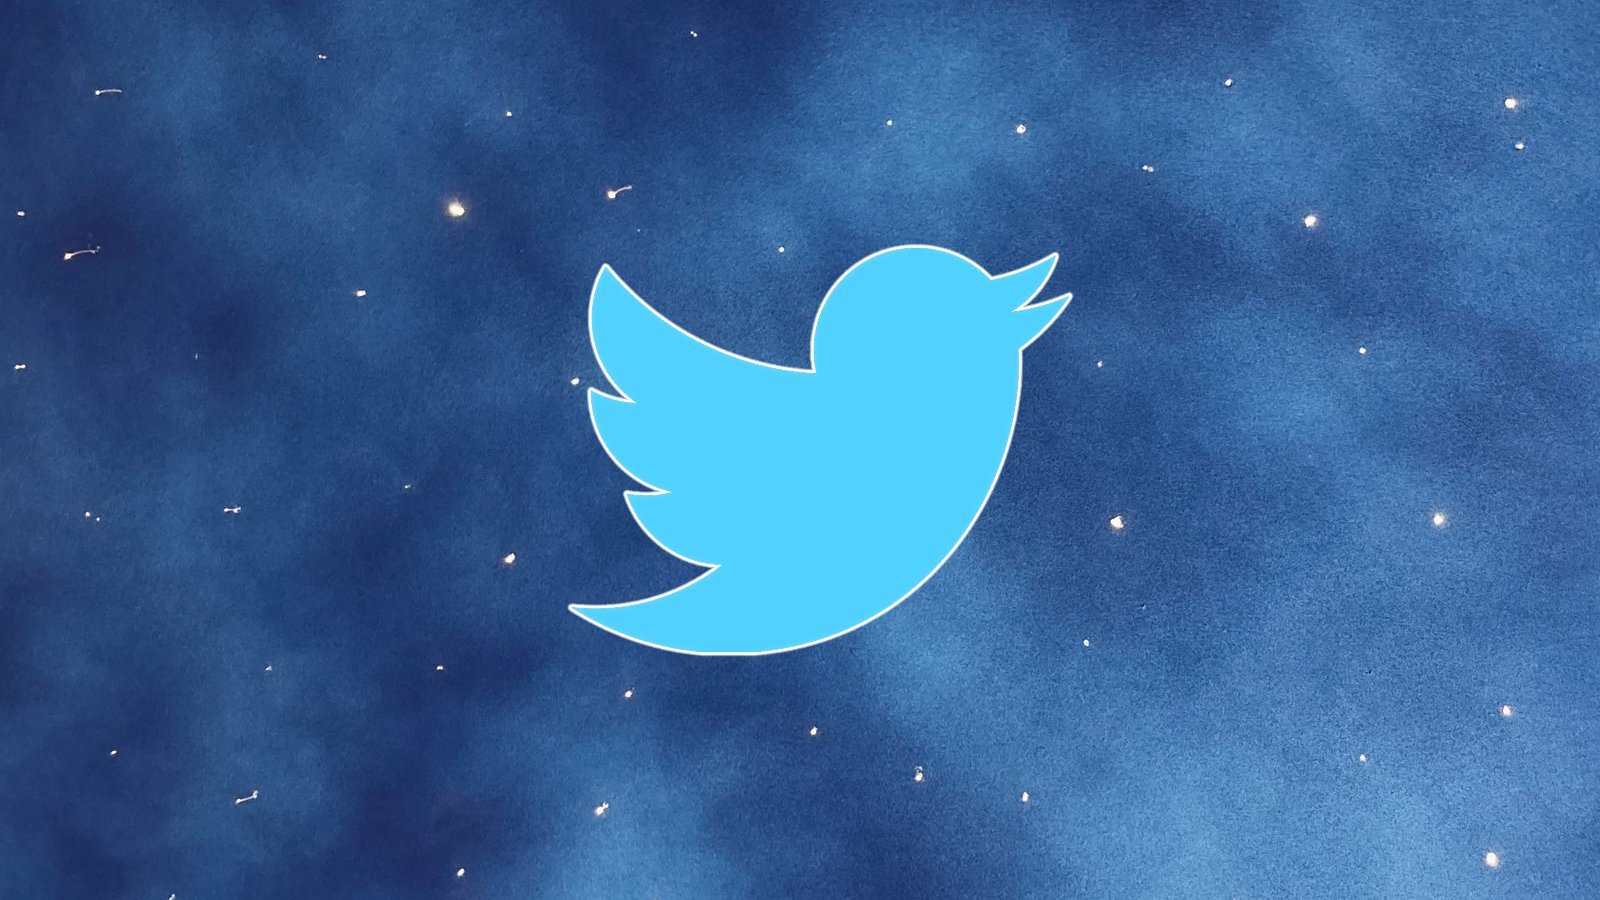 Twitter logo on a starry background